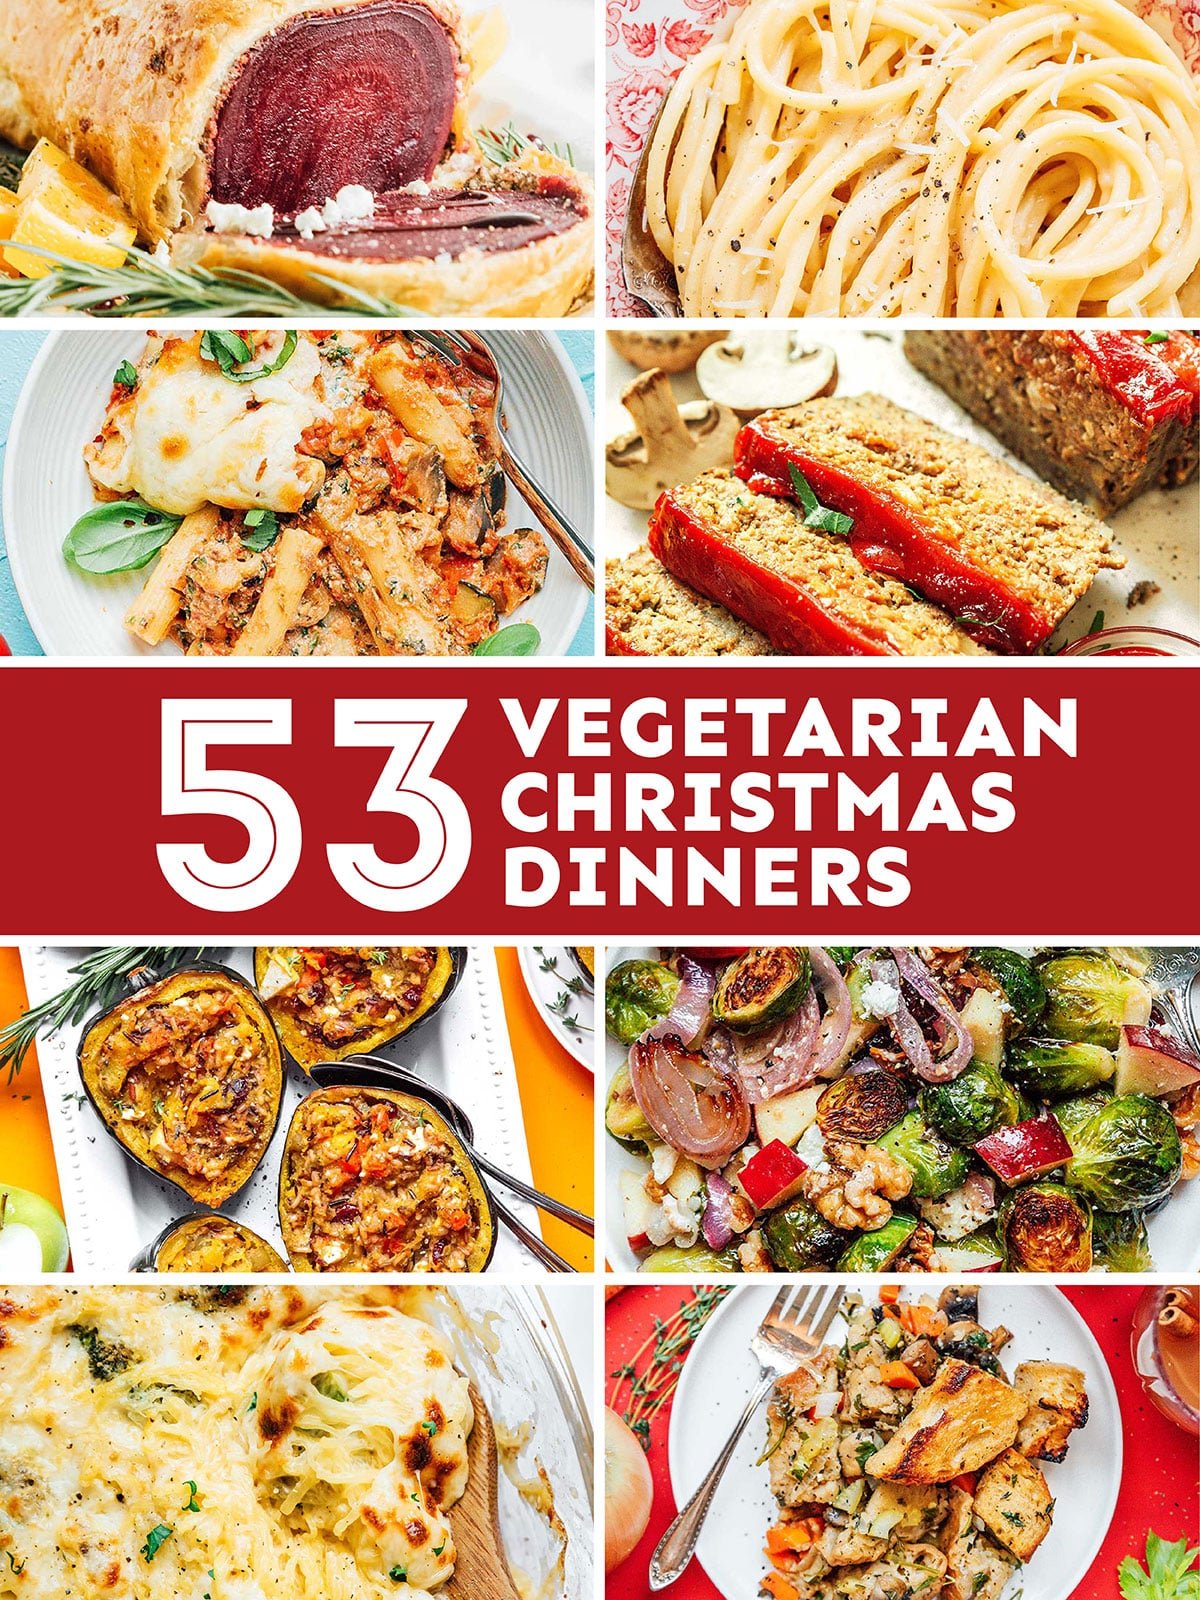 Collage that says 53 vegetarian christmas dinners.